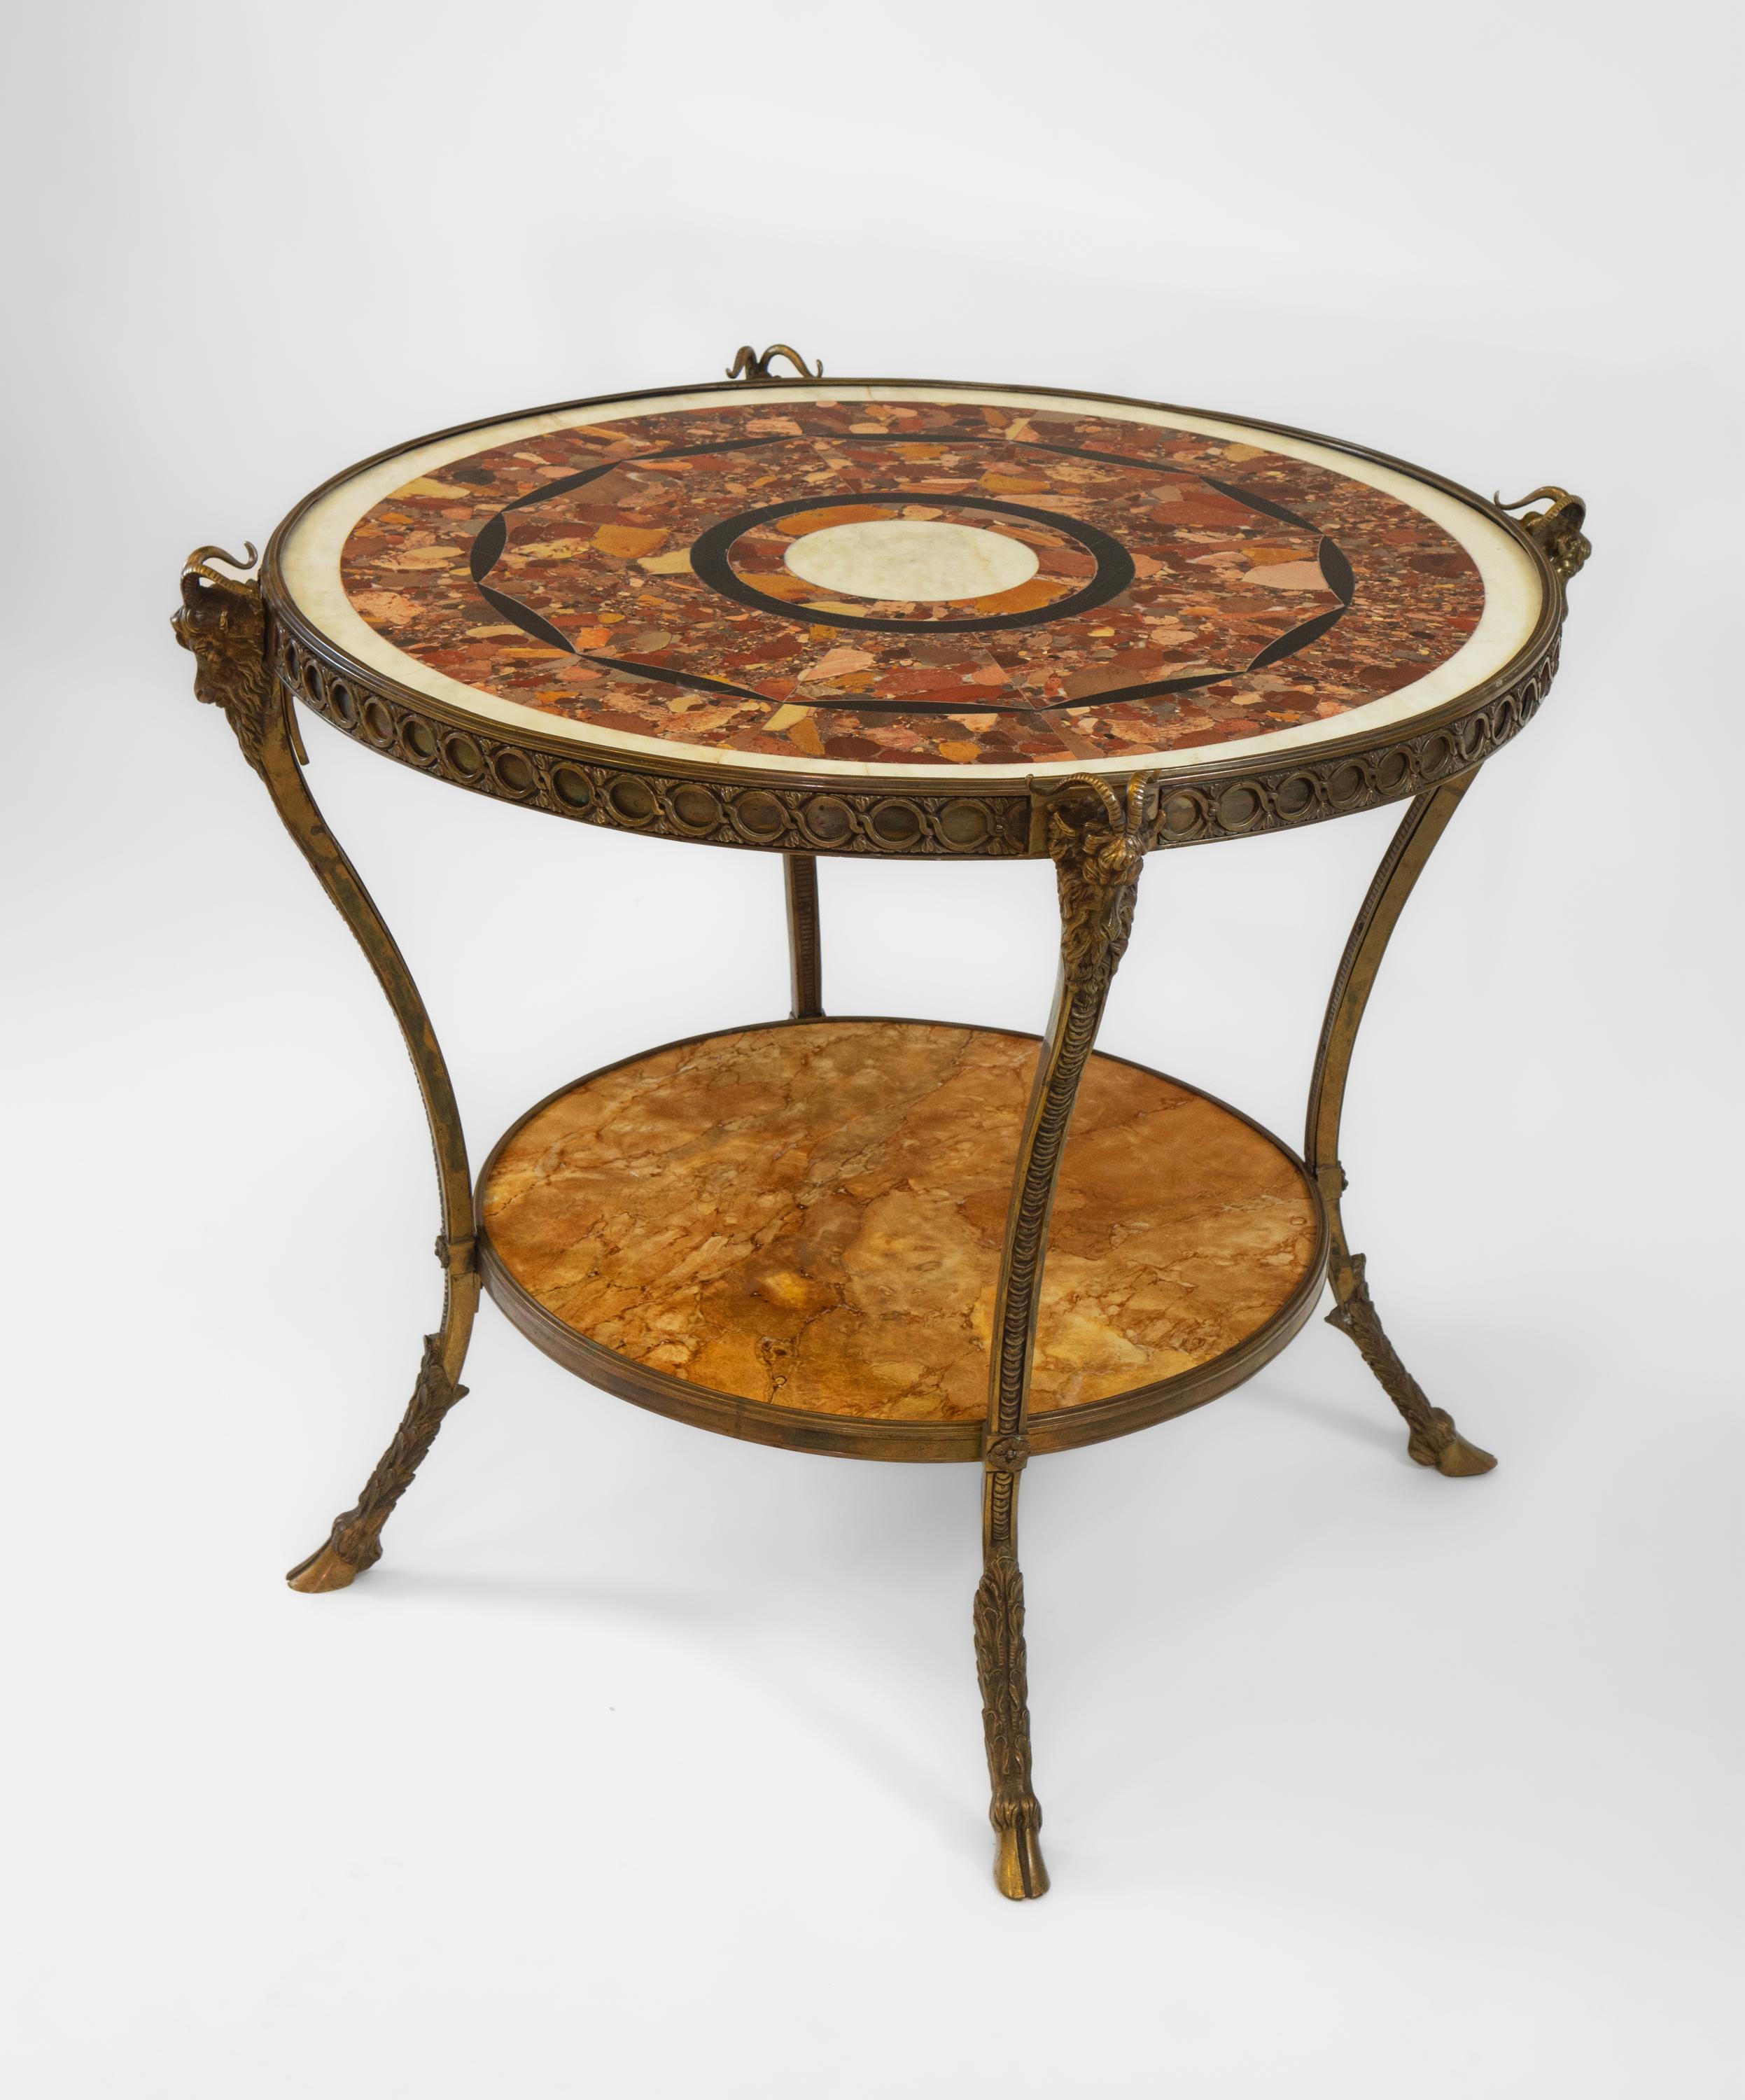 A stunning decorative French marble and bronze Guéridon. Circa 1950.

The table is of an elegant and attractive design, with the circular top featuring decorative segmented Brèche D' Alep marble. The table is supported by a bronze frame with a